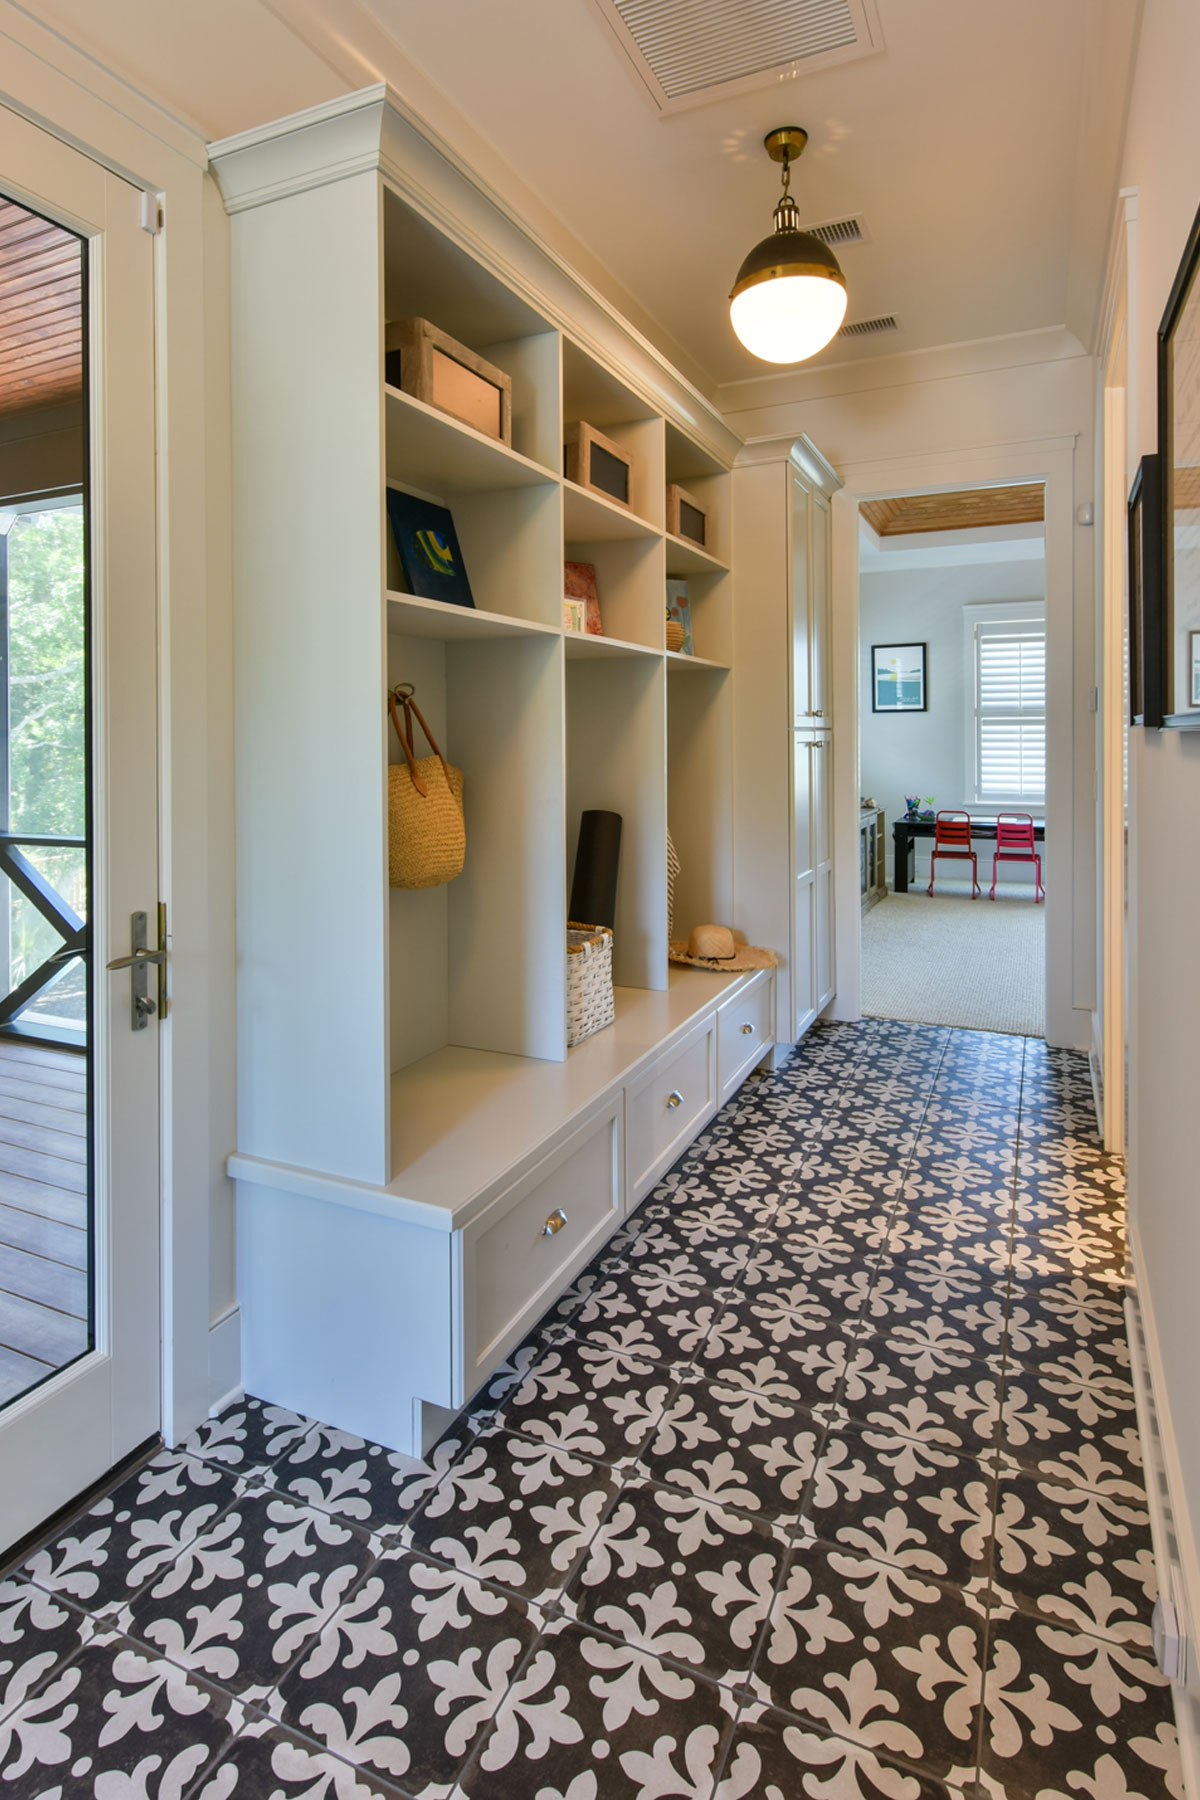 Mudroom with patterned tile floor